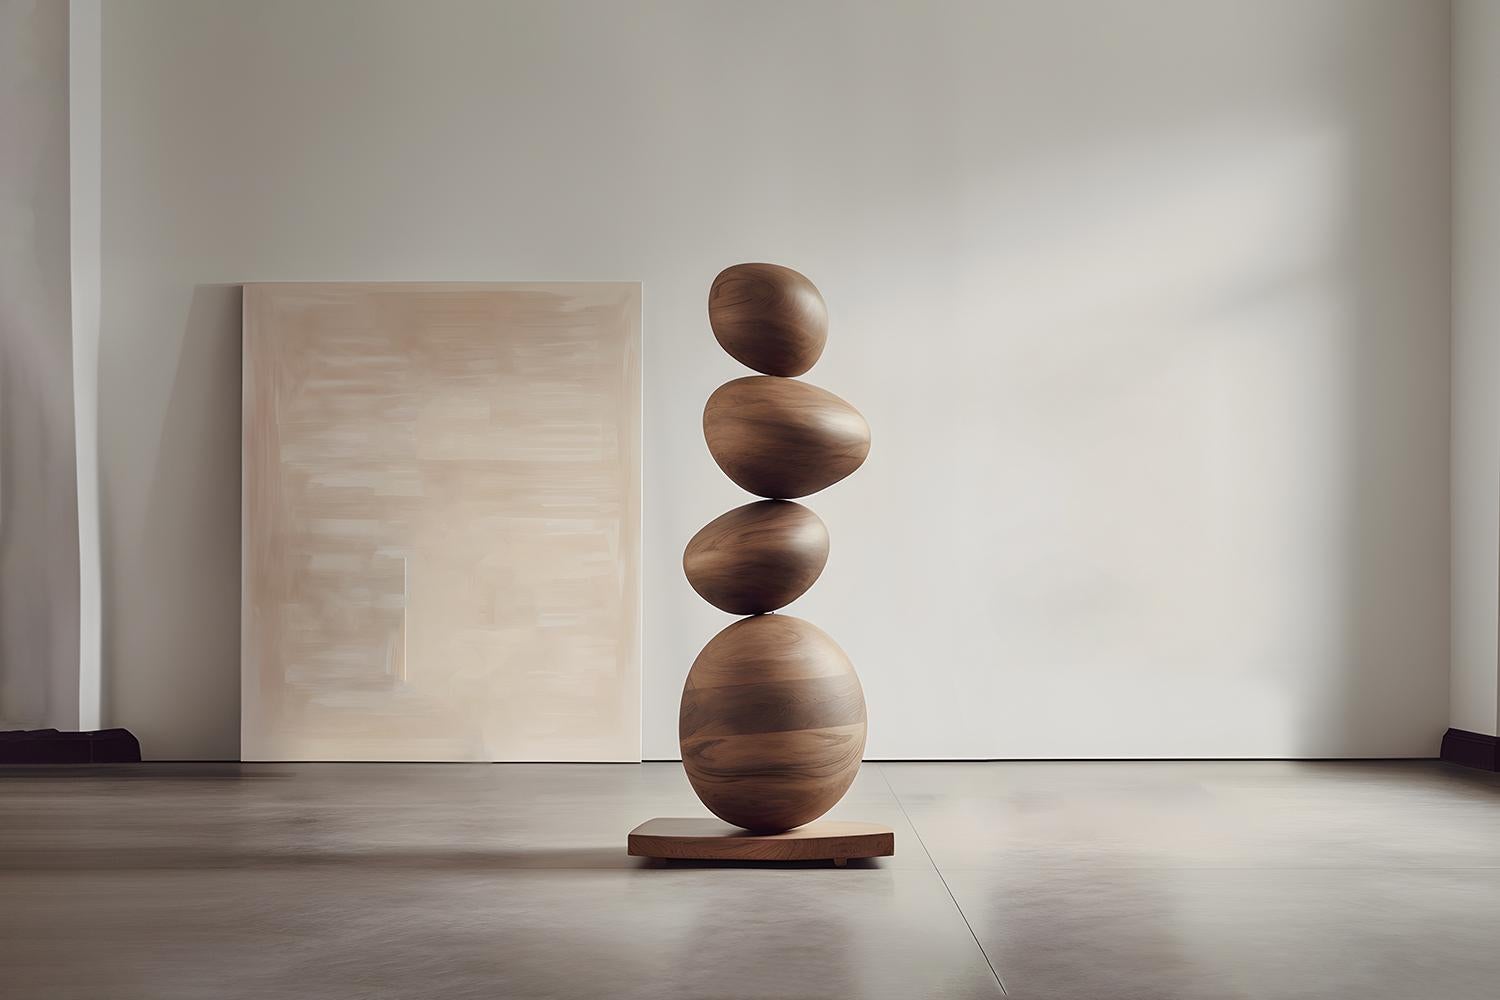 Mid-Century Modern Still Stand No13: Tall Wooden Totem Sculpture by NONO, Escalona Design For Sale